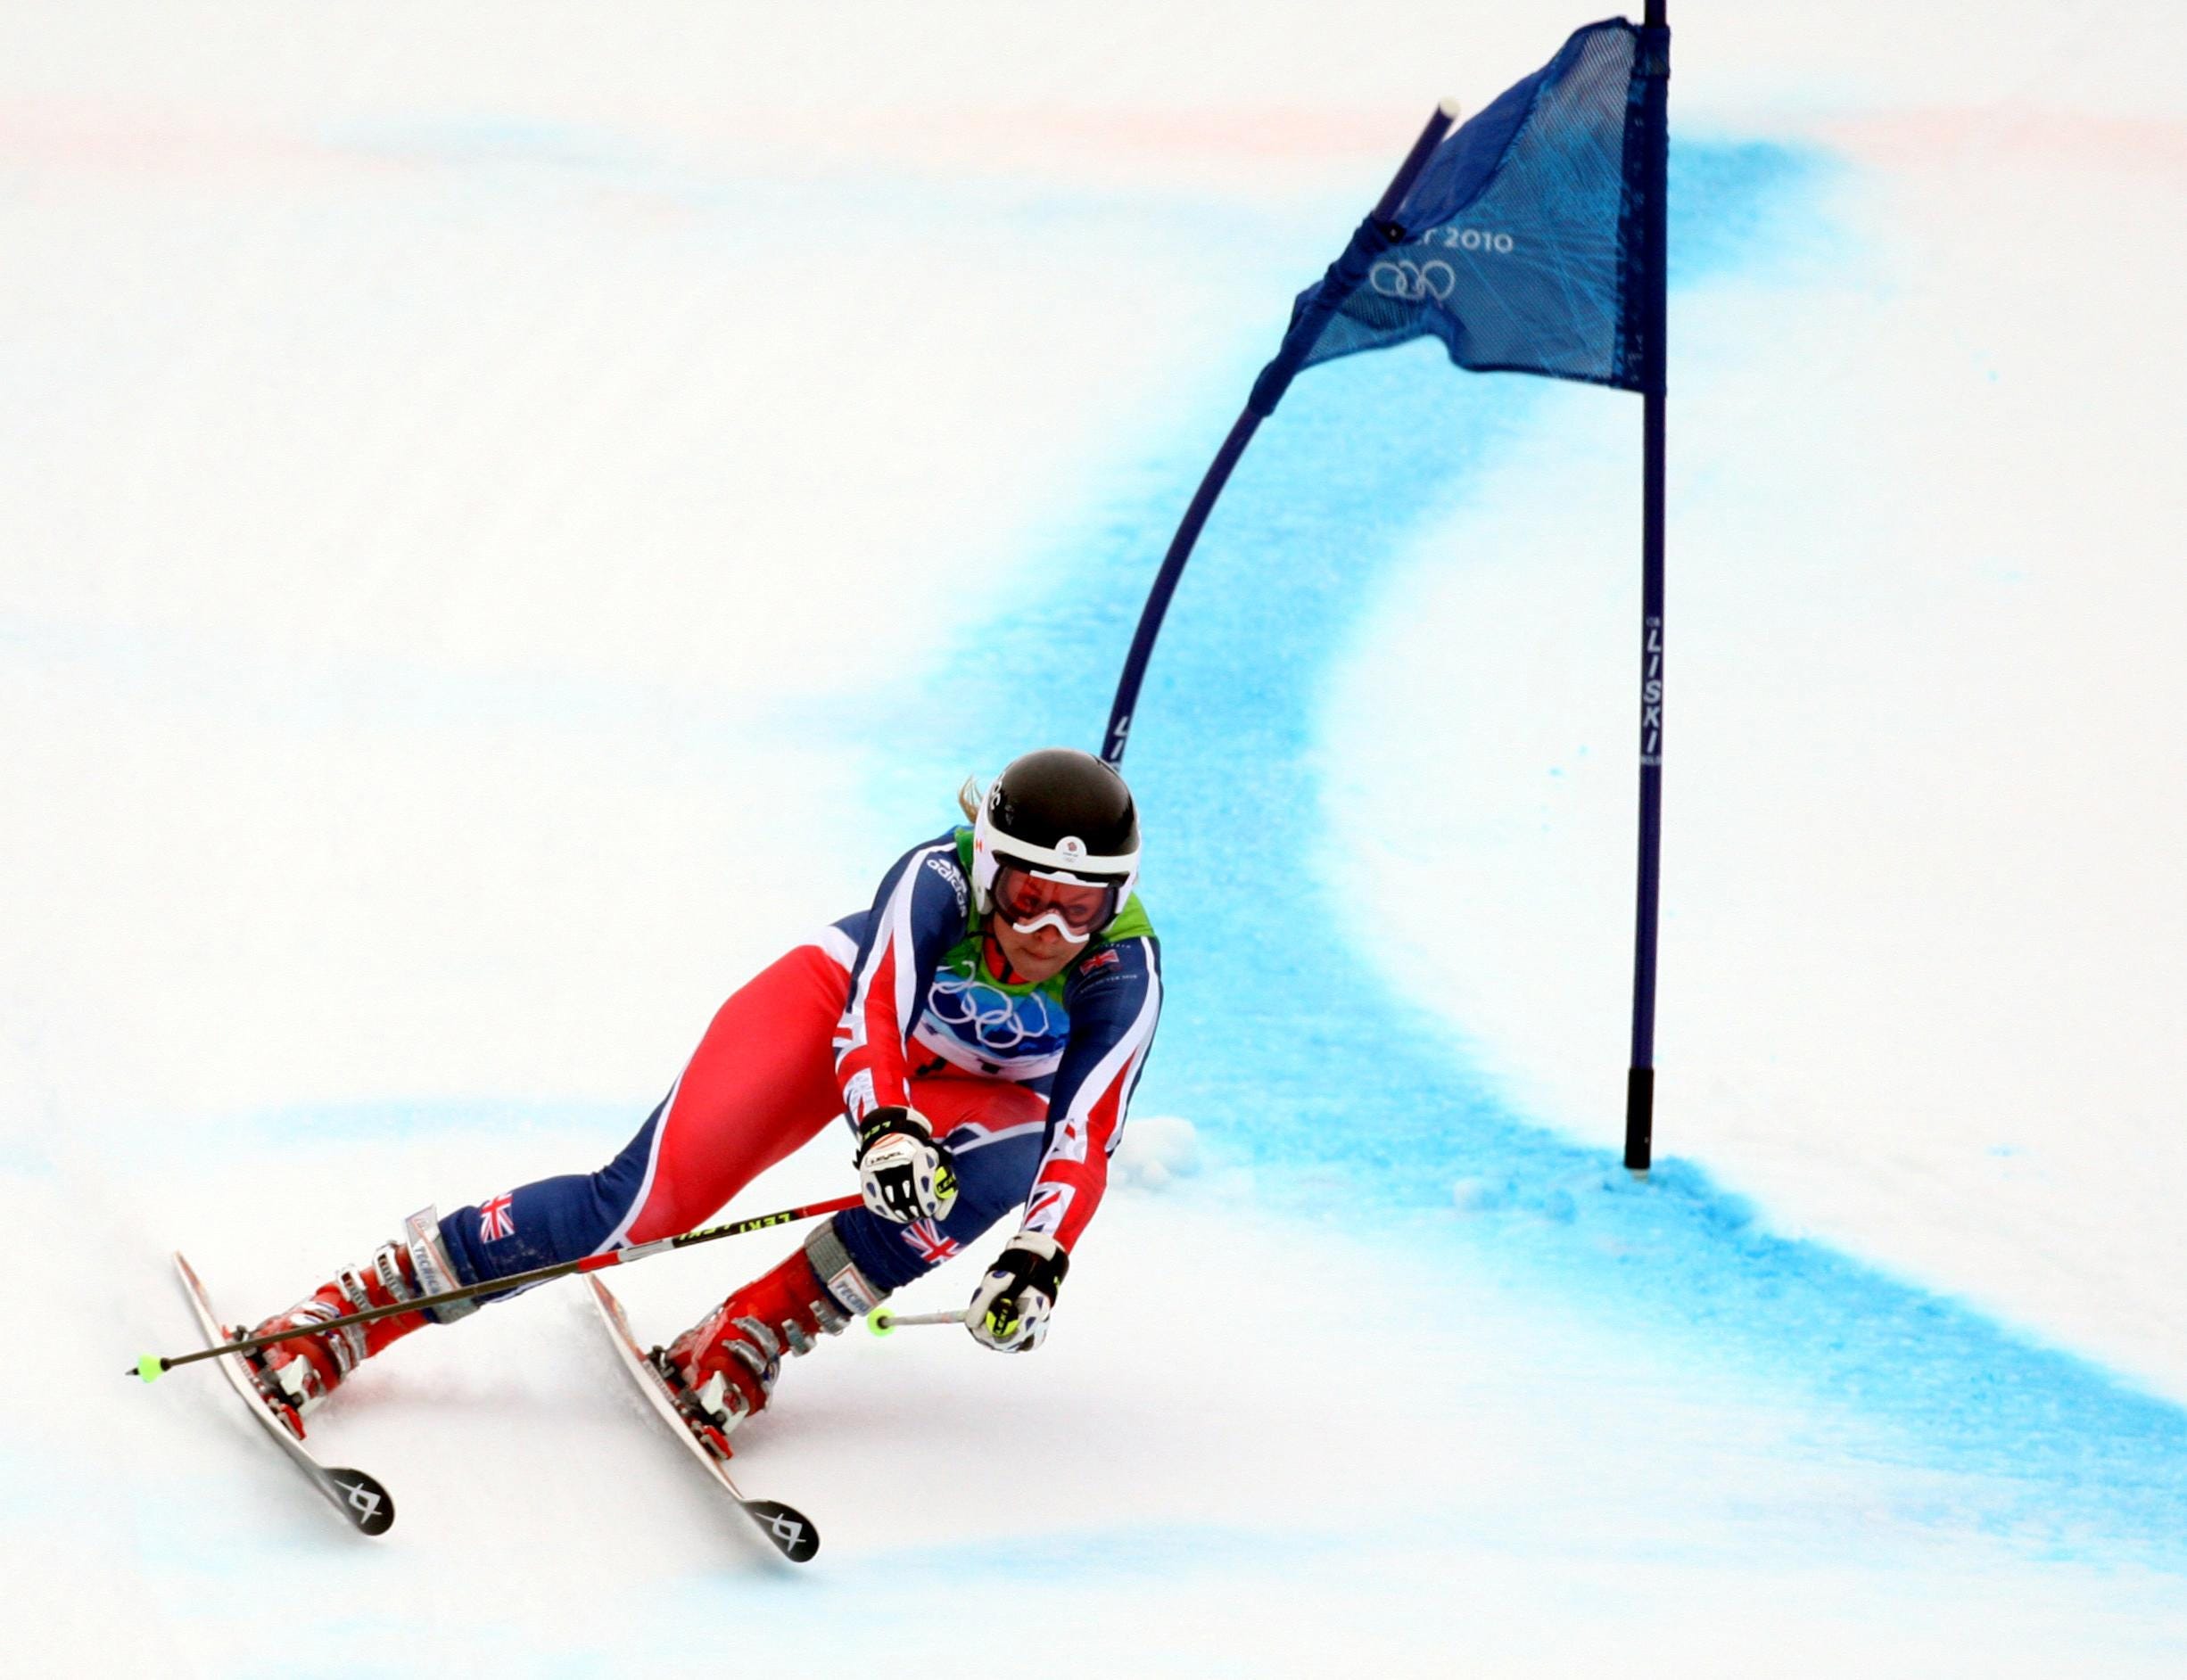 Chemmy Alcott OLY on X: Still got the skiers derrière and